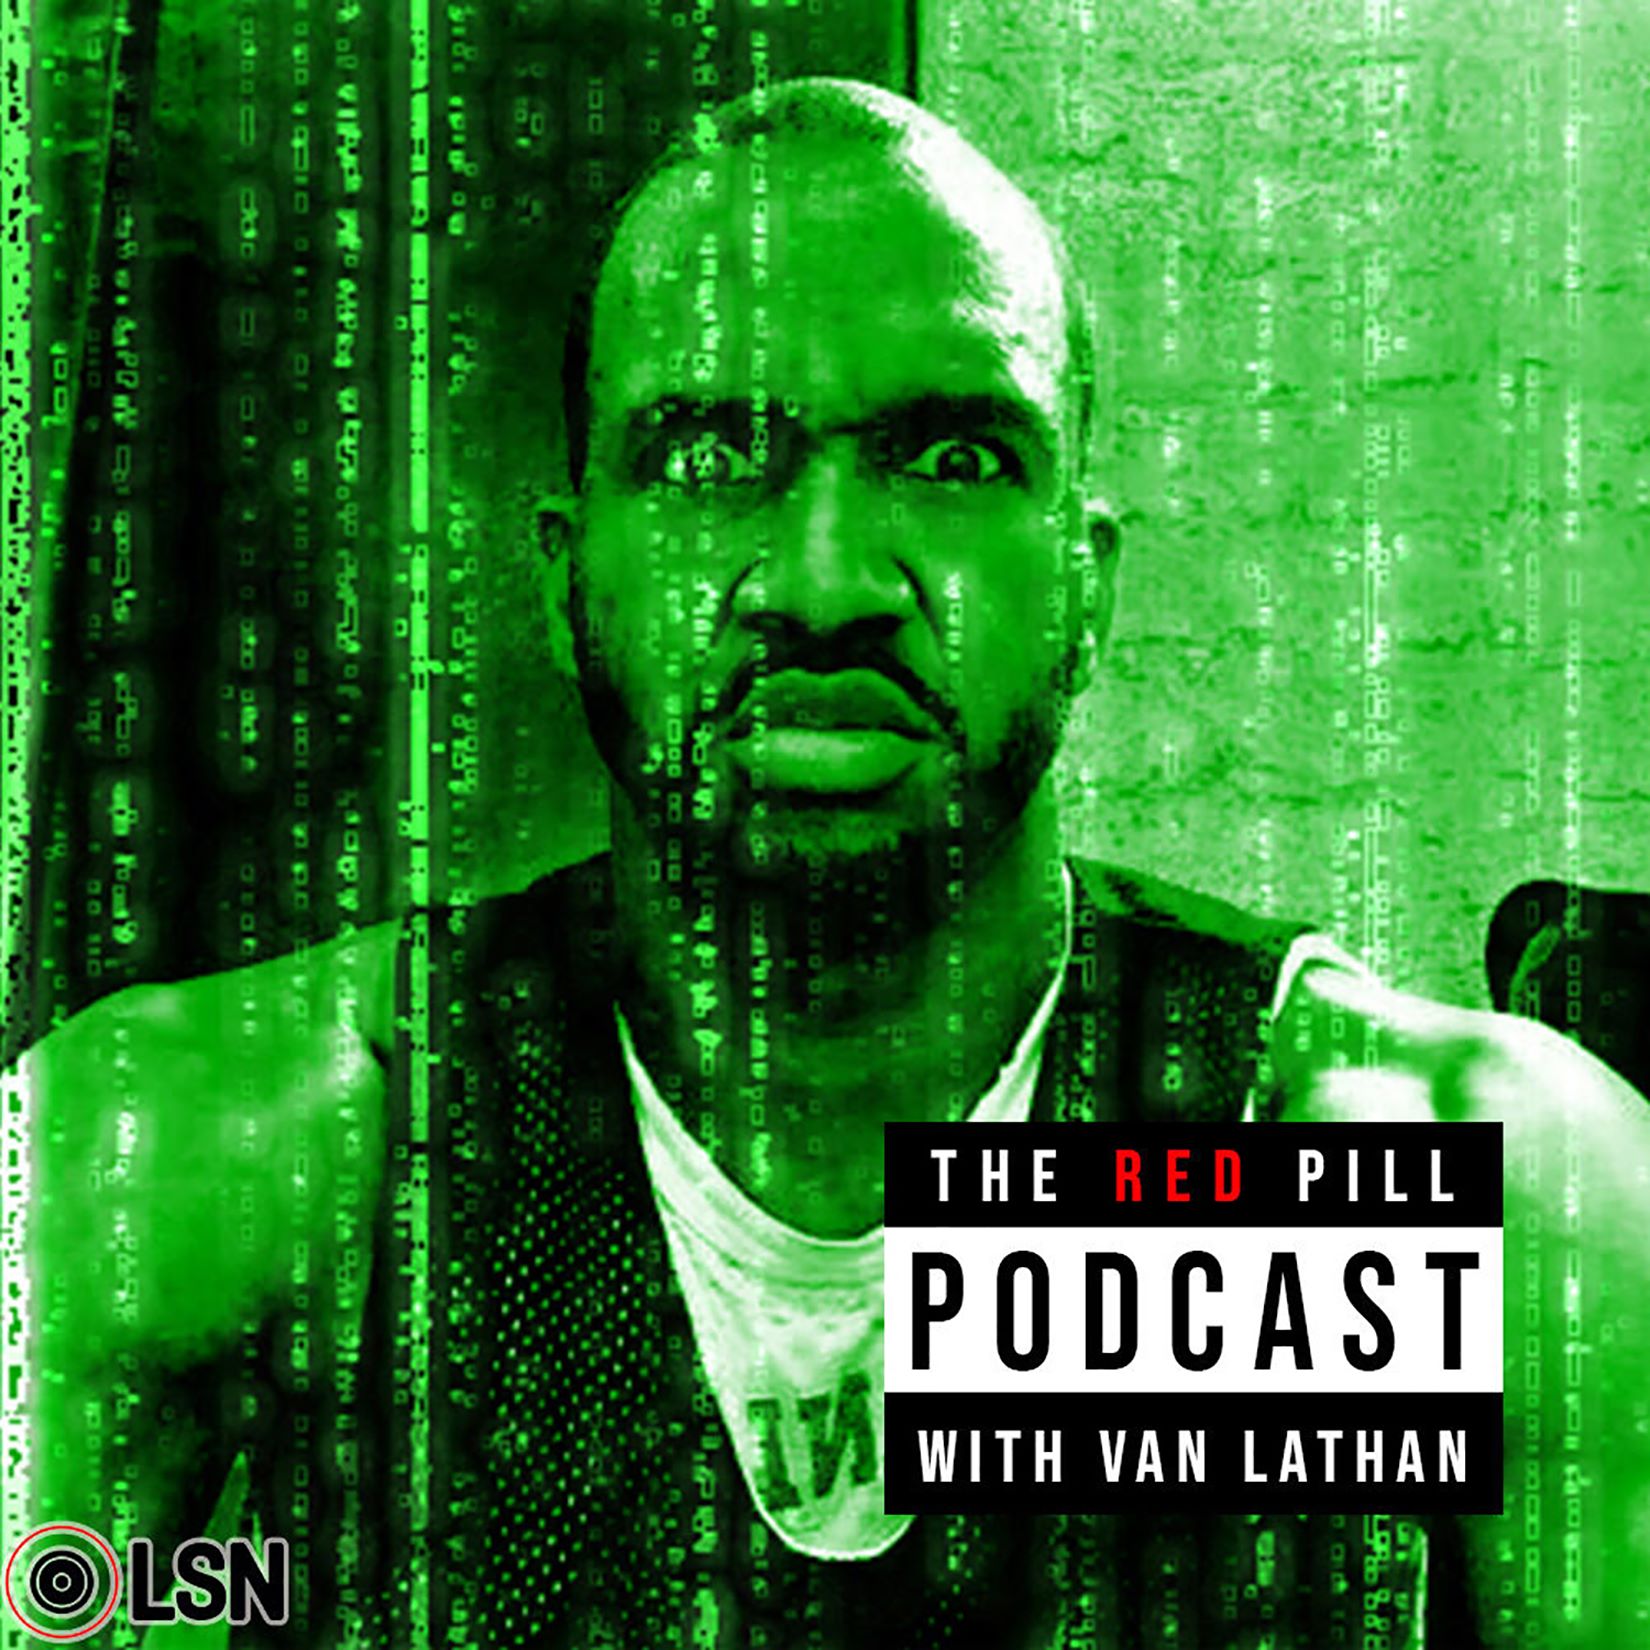 Stream Van Lathan's Red Pill | Listen podcast online for free on SoundCloud